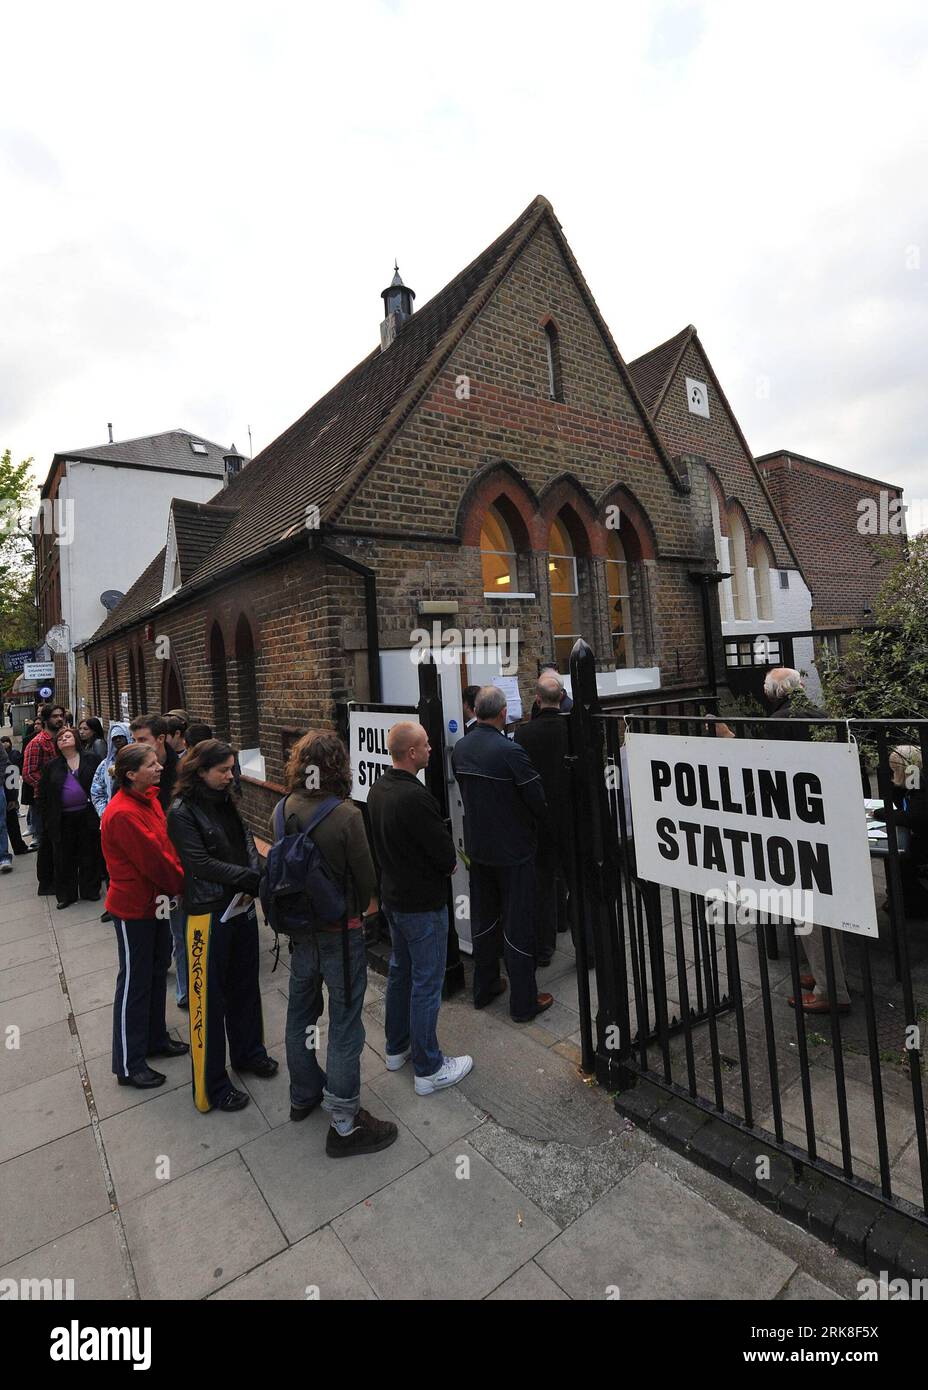 Bildnummer: 54030340  Datum: 06.05.2010  Copyright: imago/Xinhua (100506) -- LONDON, May 6, 2010 (Xinhua) -- Voters wait to cast their ballots at a polling station in London, Britain, May 6, 2010. The turnout for the most eagerly anticipated general election for nearly 40 years in Britain was expected to be up on the last general election s figure of 61 percent, and some commentators believe it could be as high as 70 percent, (Xinhua/Wu Wei) (zw) (6)BRITAIN-LONDON-GENERAL ELECTION-TURNOUT PUBLICATIONxNOTxINxCHN Gesellschaft Politik Wahl Wahlen England Wahllokal kbdig xdp premiumd xint 2010 hoc Stock Photo